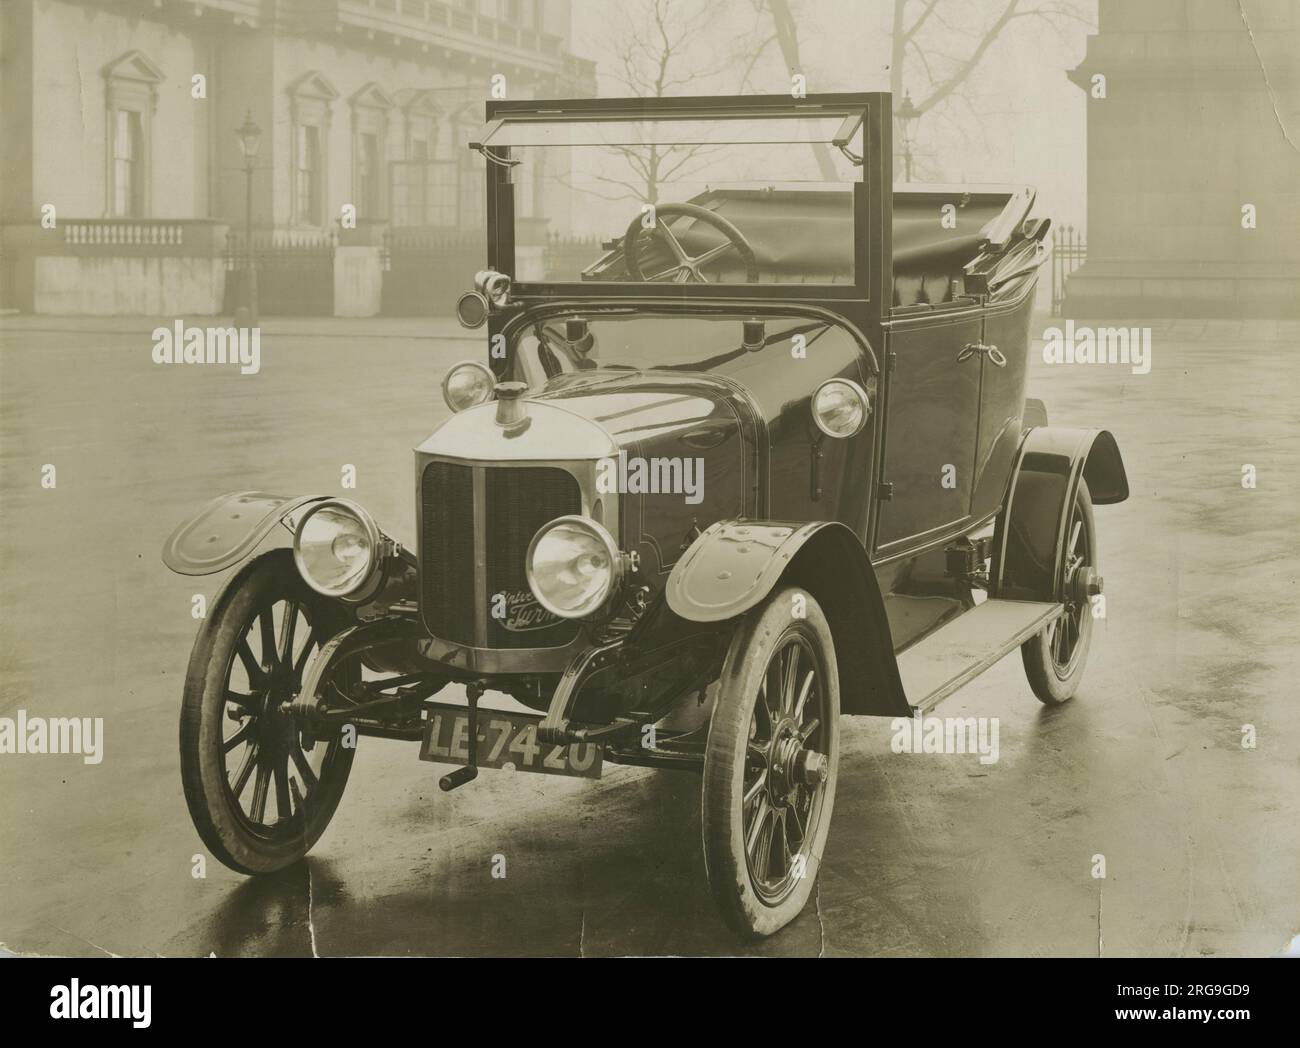 Turner Two-seater Vintage Car C1914, Possibly at Chiswick, London, England. Stock Photo